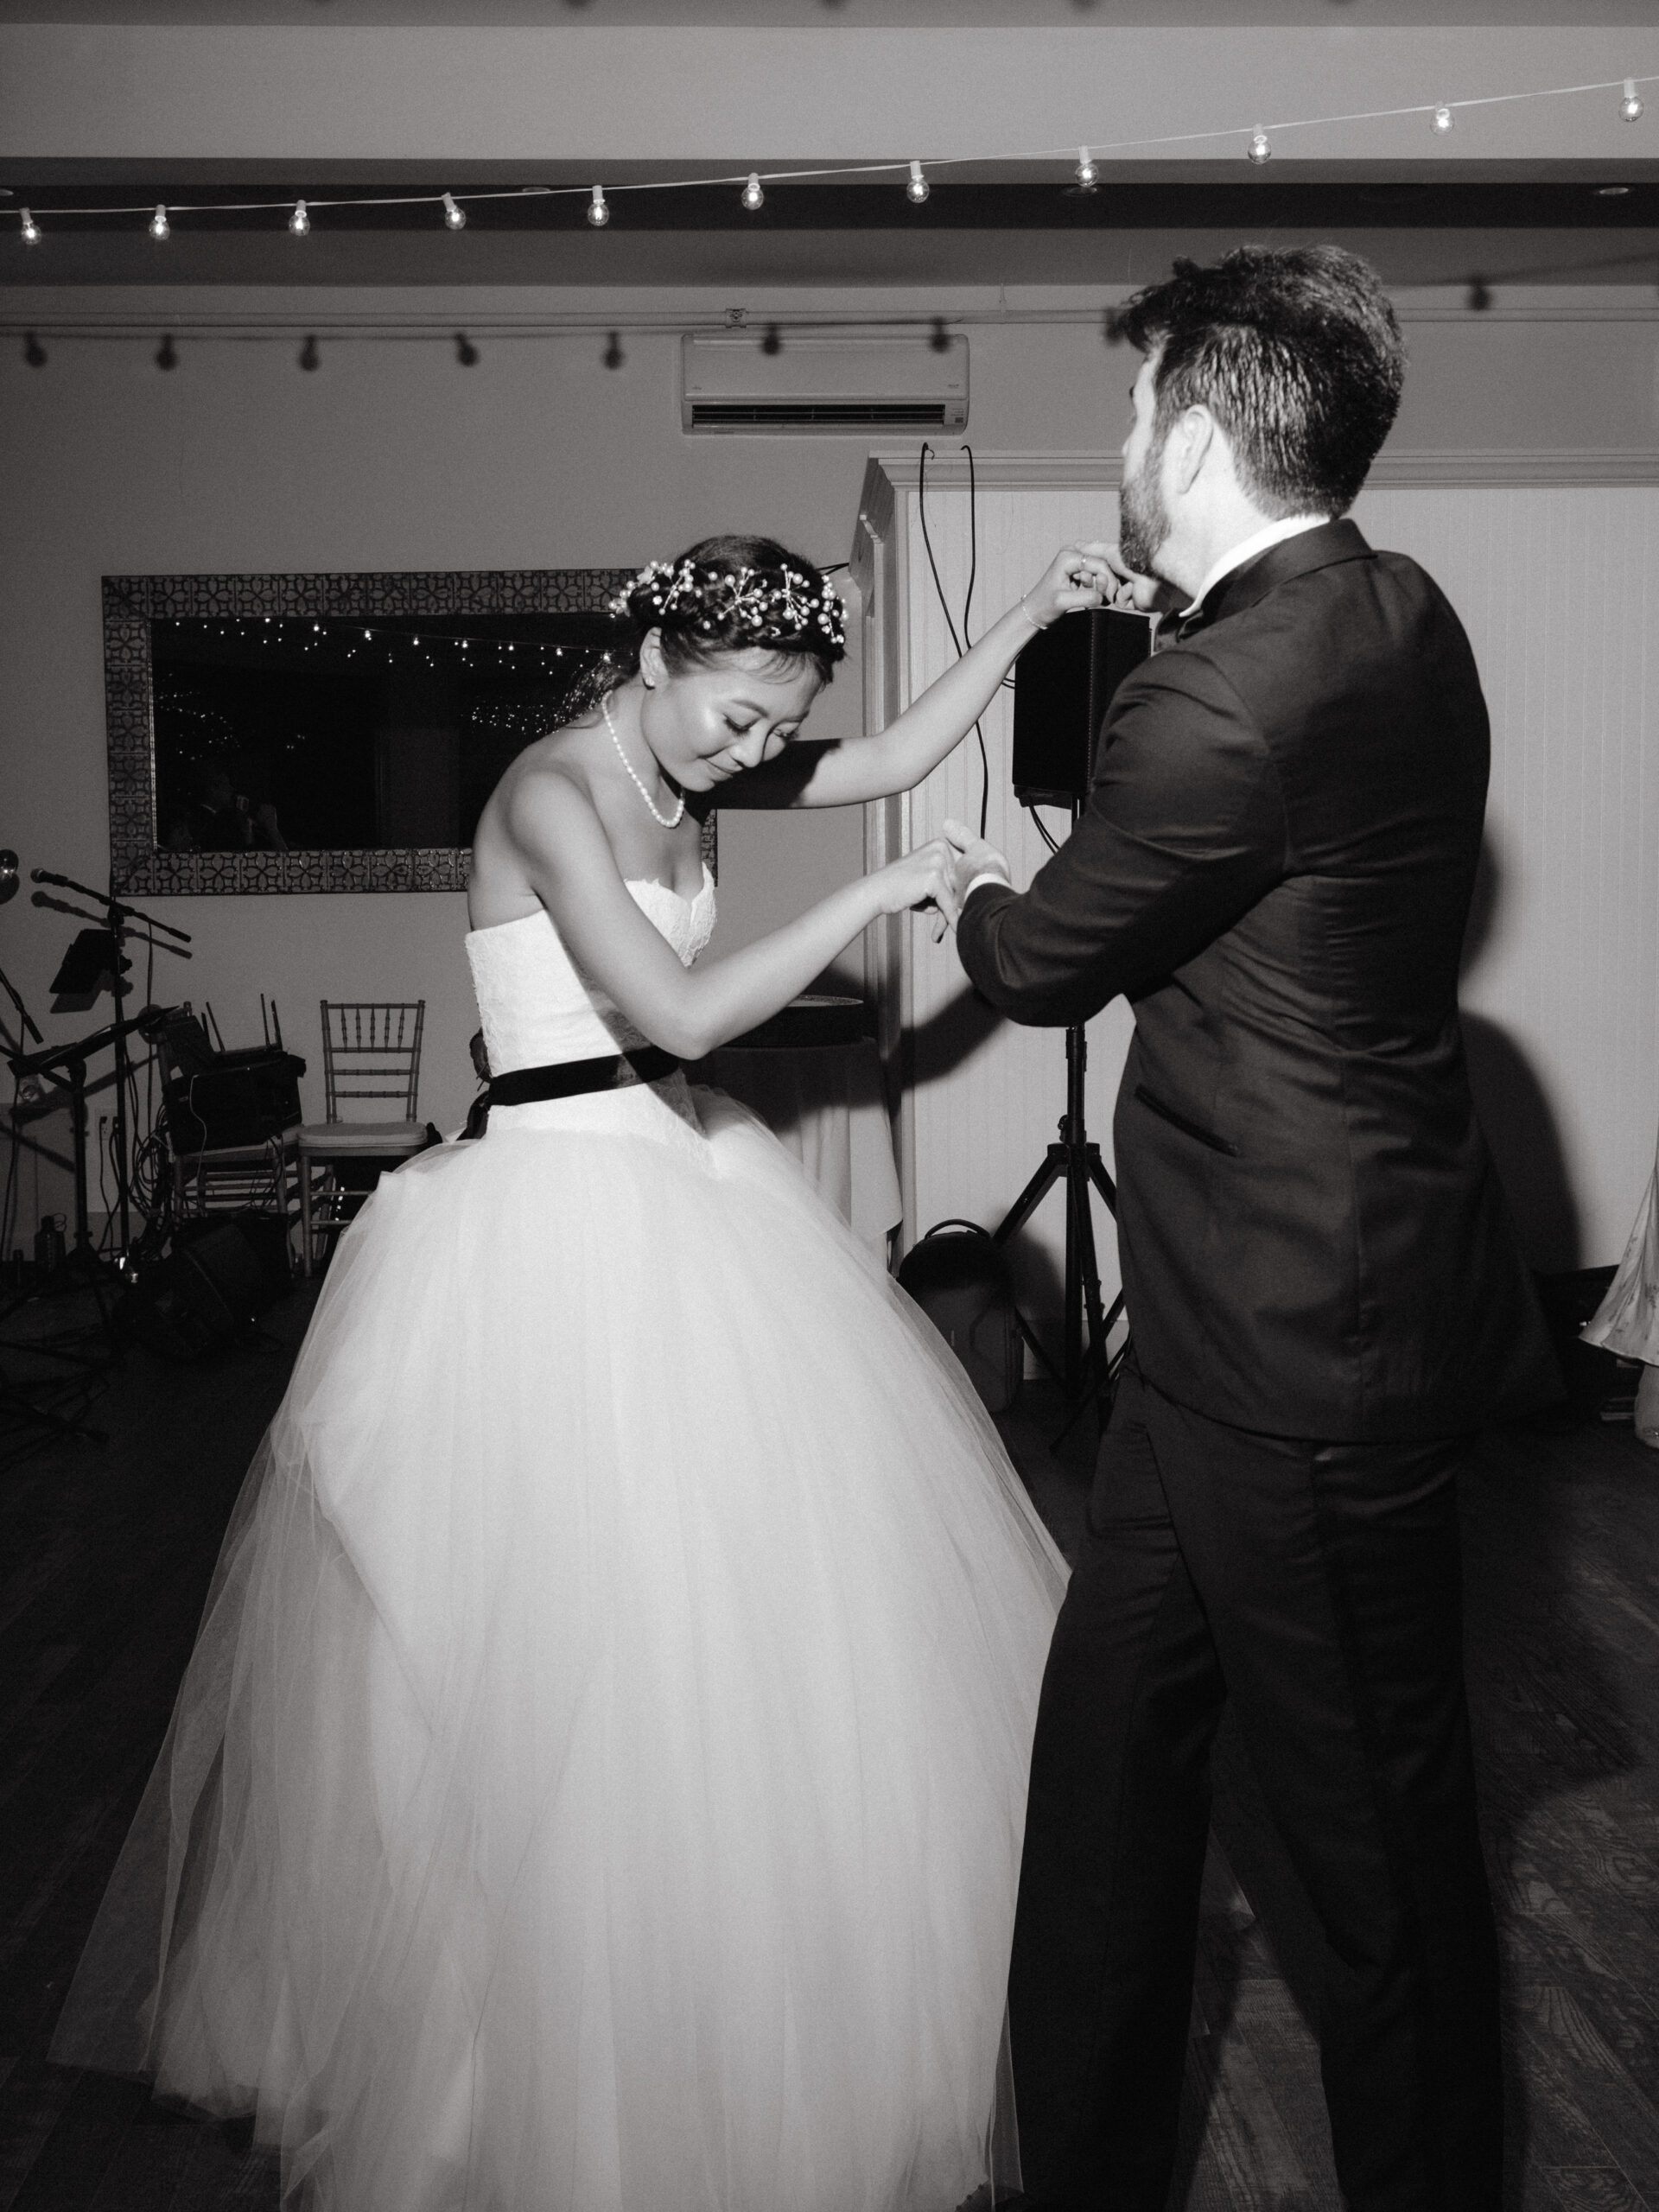 Editorial photo of the bride and groom while dancing. Image by Jenny Fu Studio